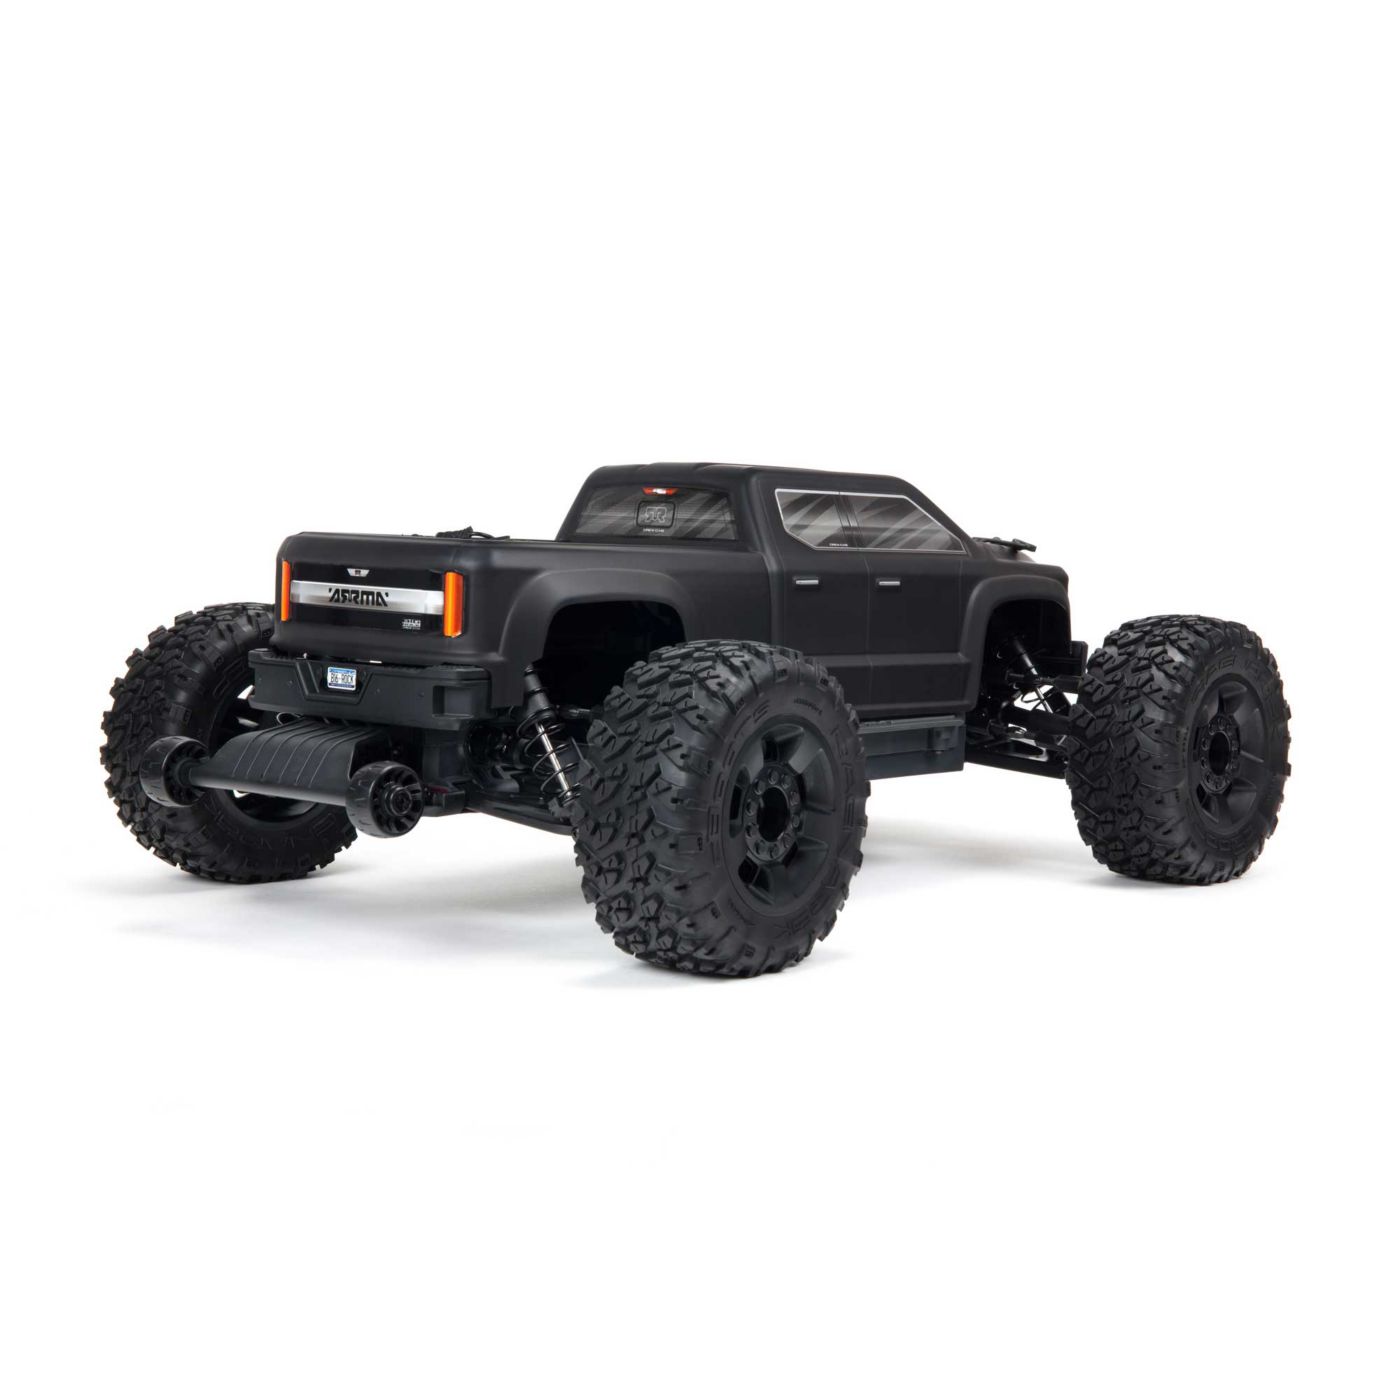 MODSTER Evolution X Brushless: The ideal 1:10 scale RC basher.